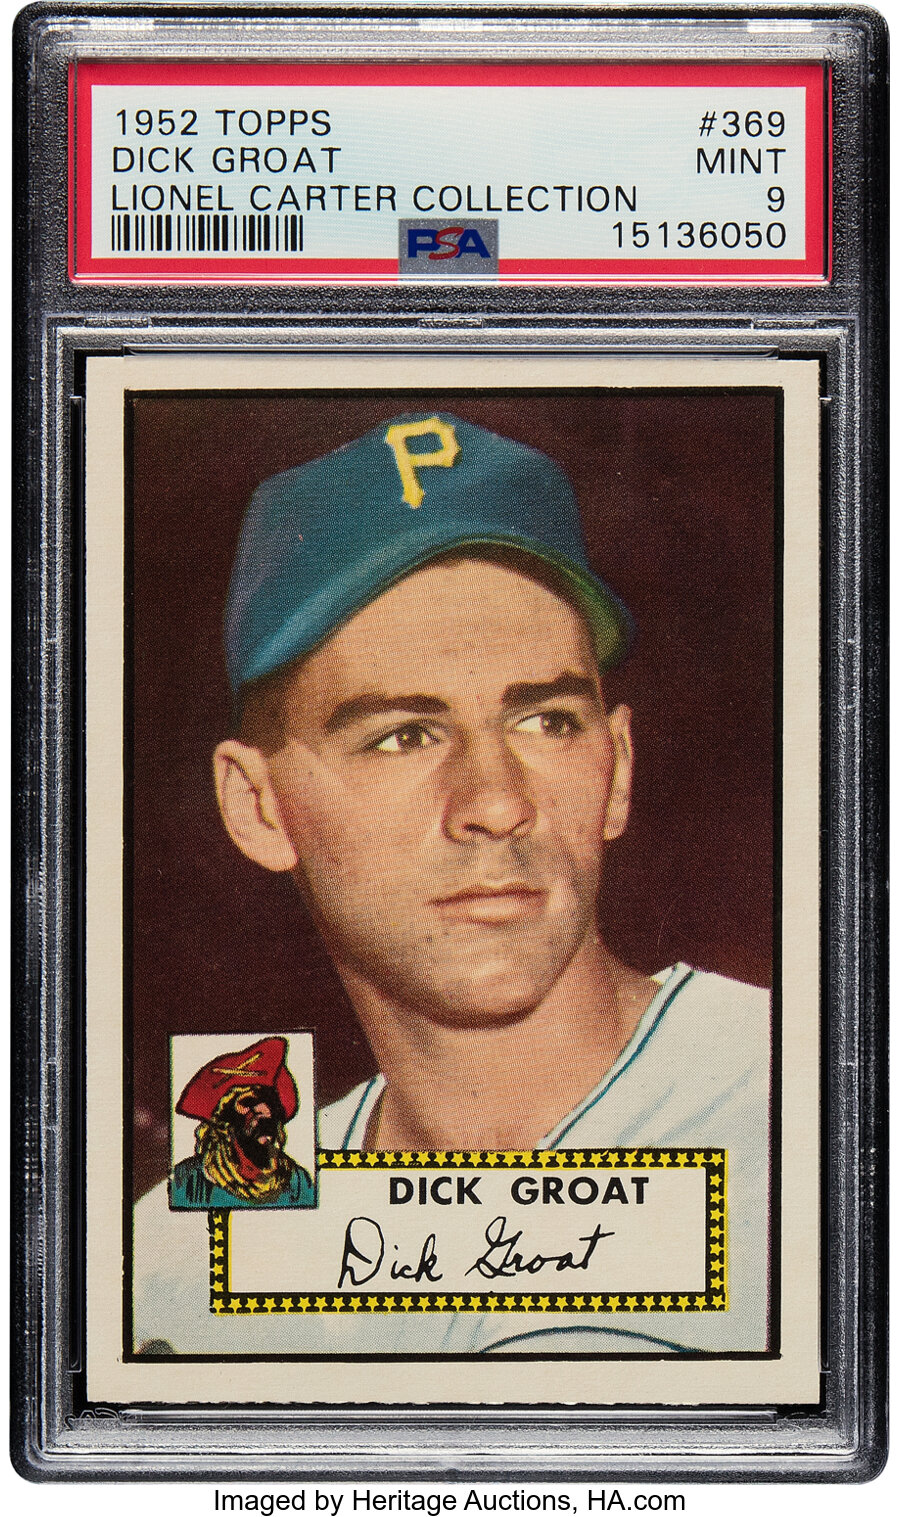 1952 Topps Dick Groat Rookie #369 PSA Mint 9 - Pop Five, One Higher! From the Lionel Carter Collection